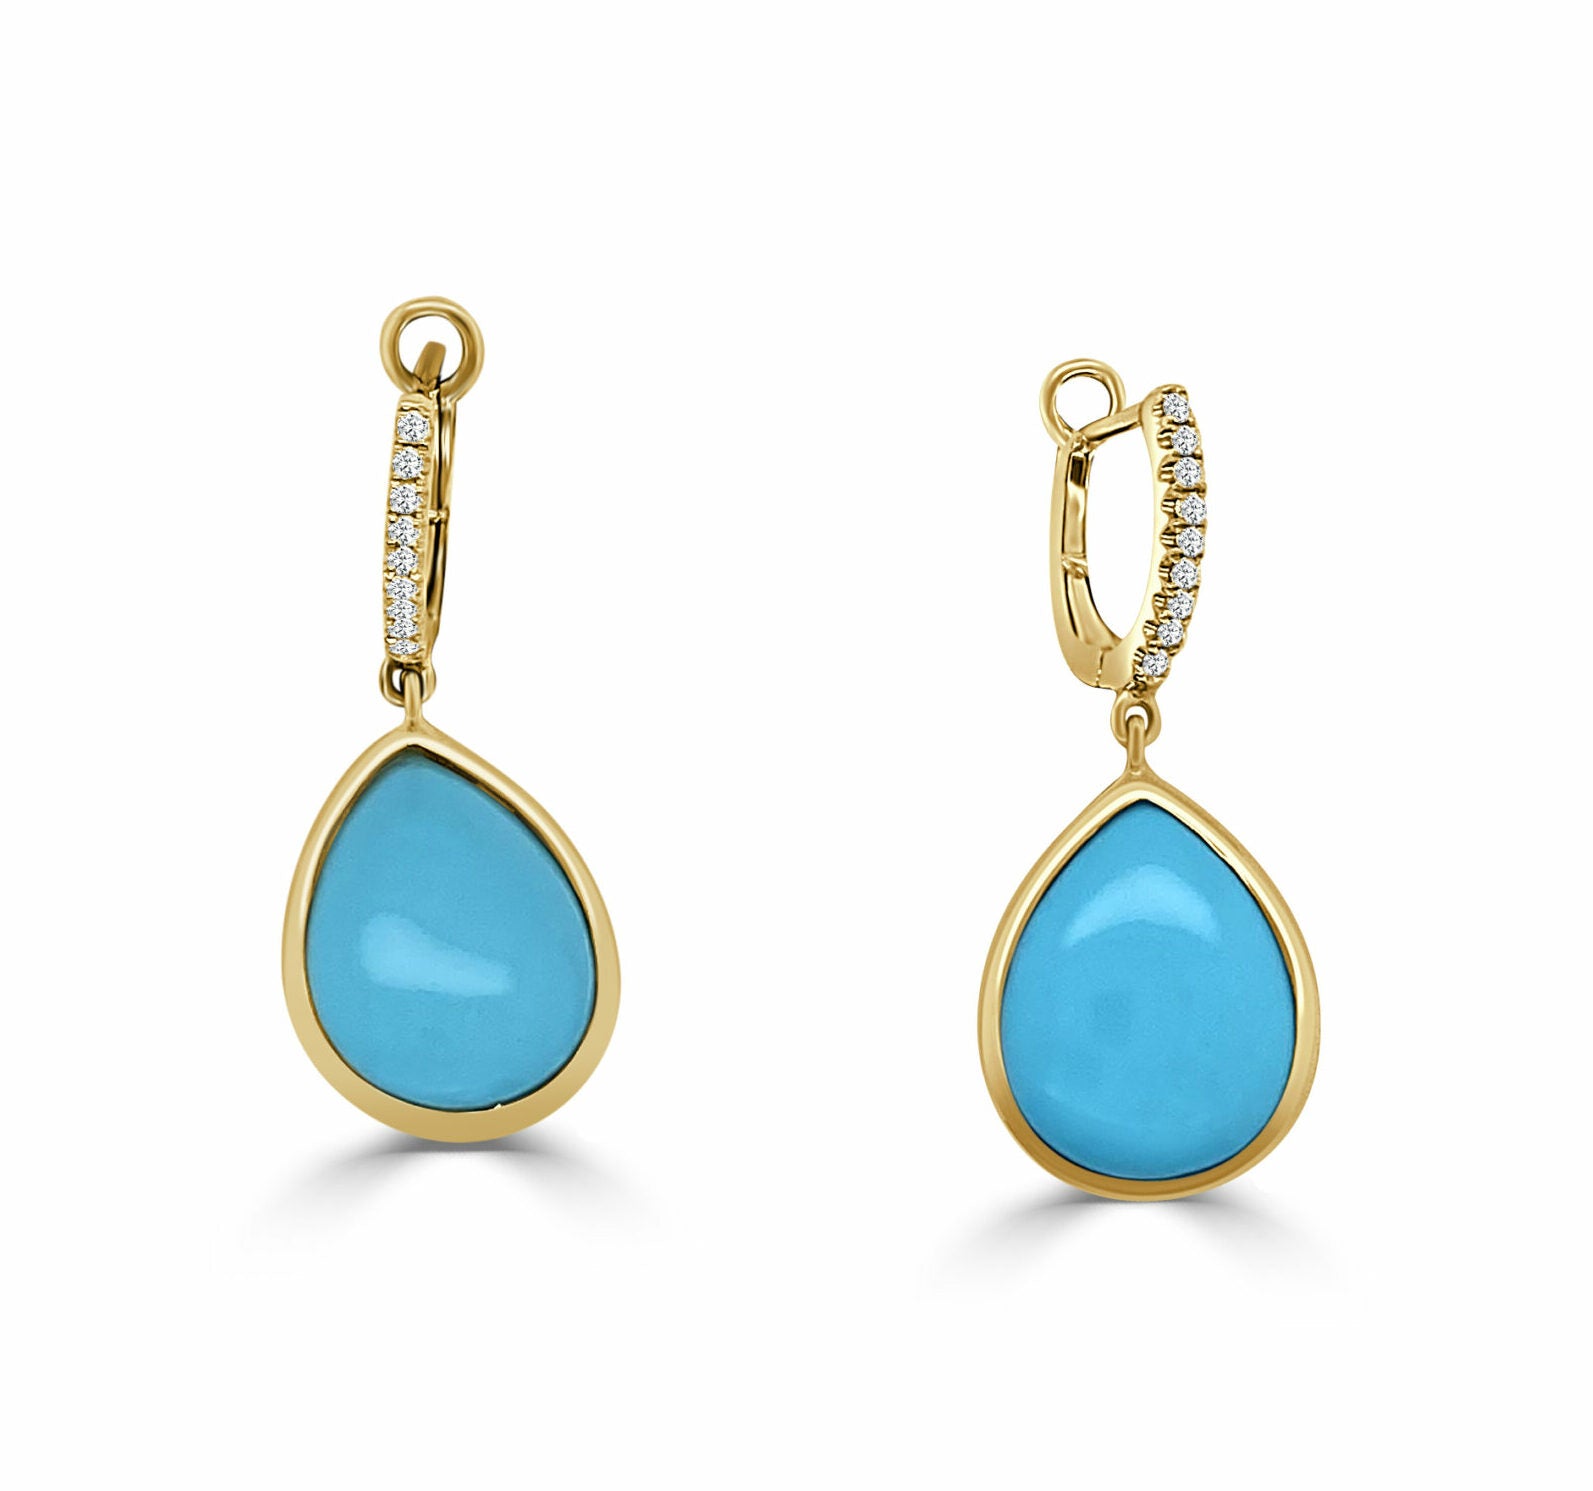 Frederic Sage Yellow Gold Luna Turquoise & Diamond Earrings - Colored Stone Earrings